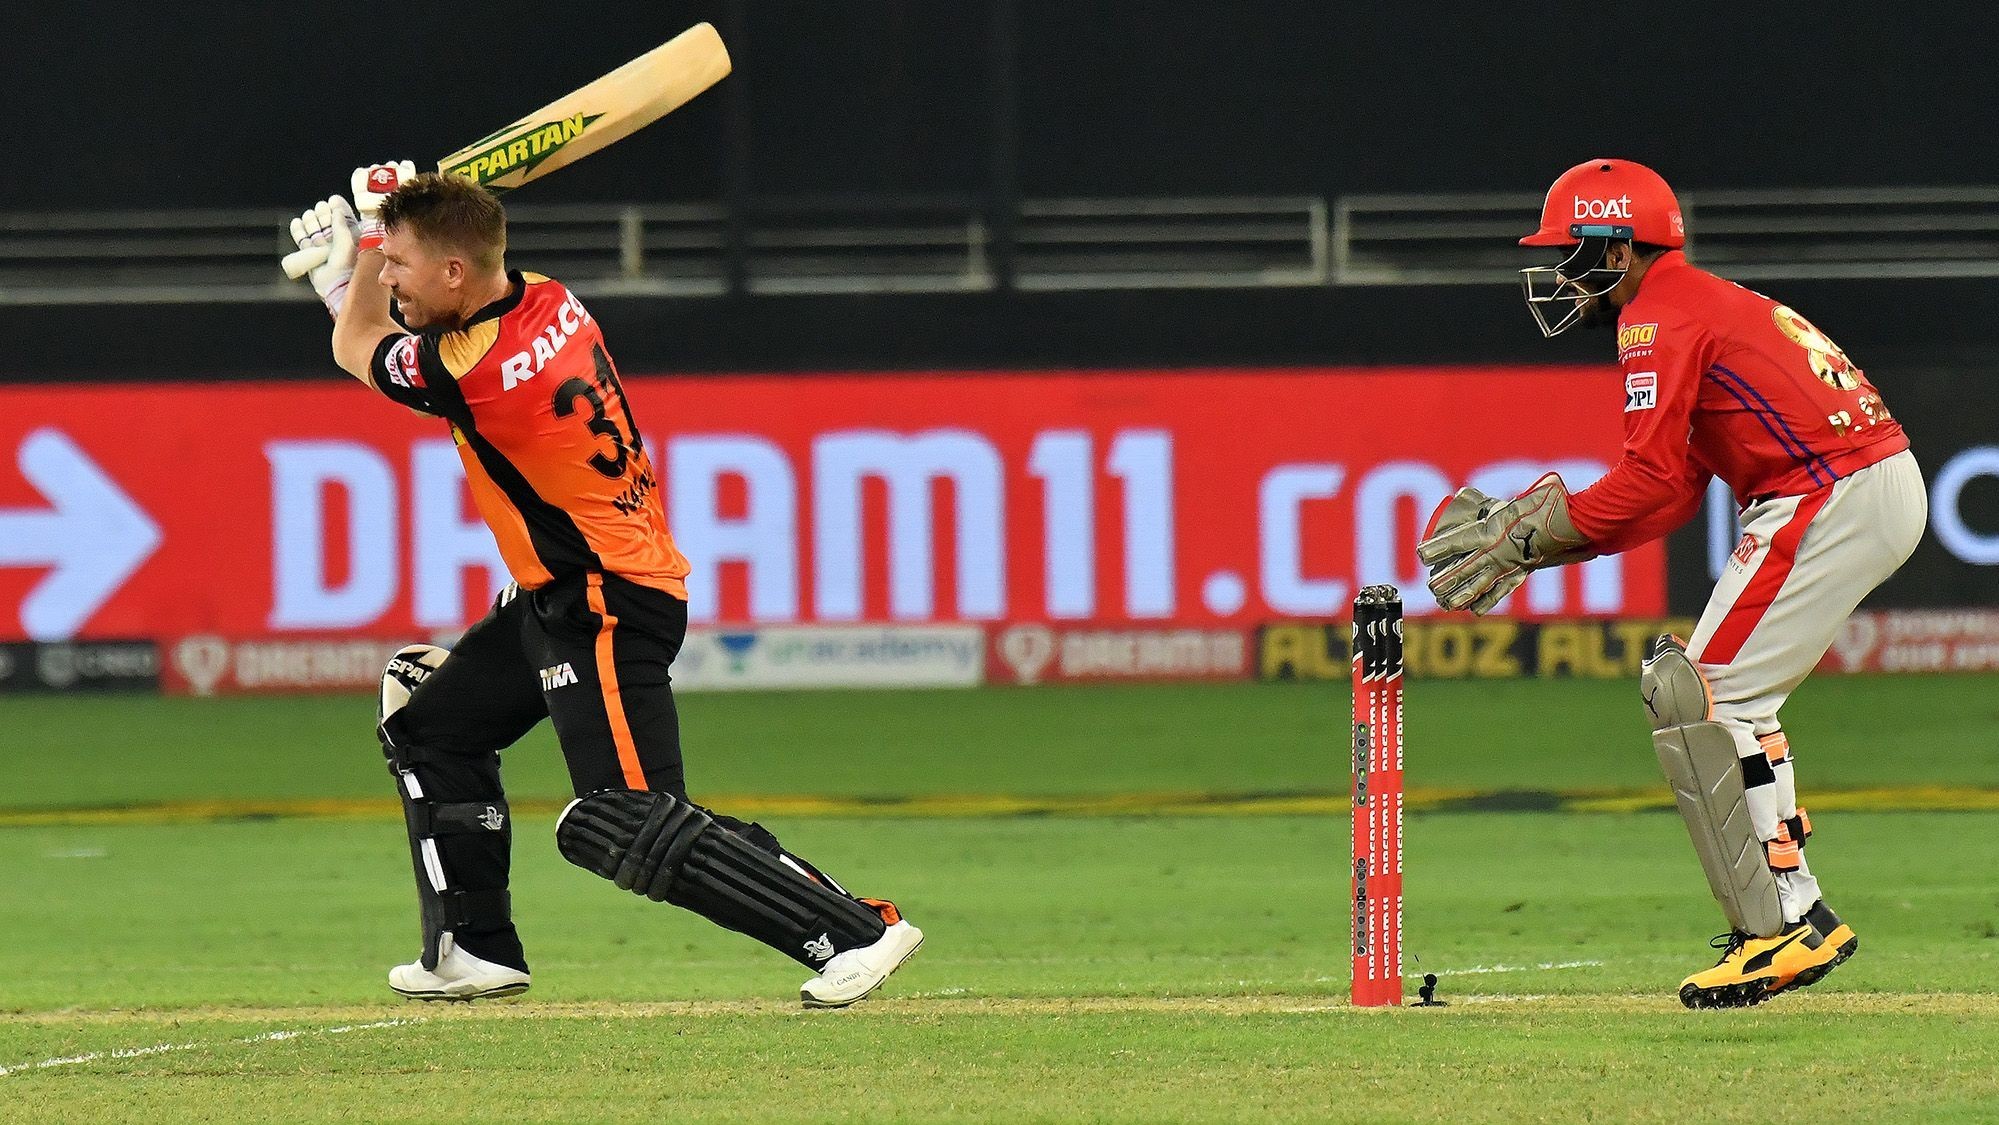 IPL 2020: Match 43, KXIP v SRH - Statistical Preview of the Match 